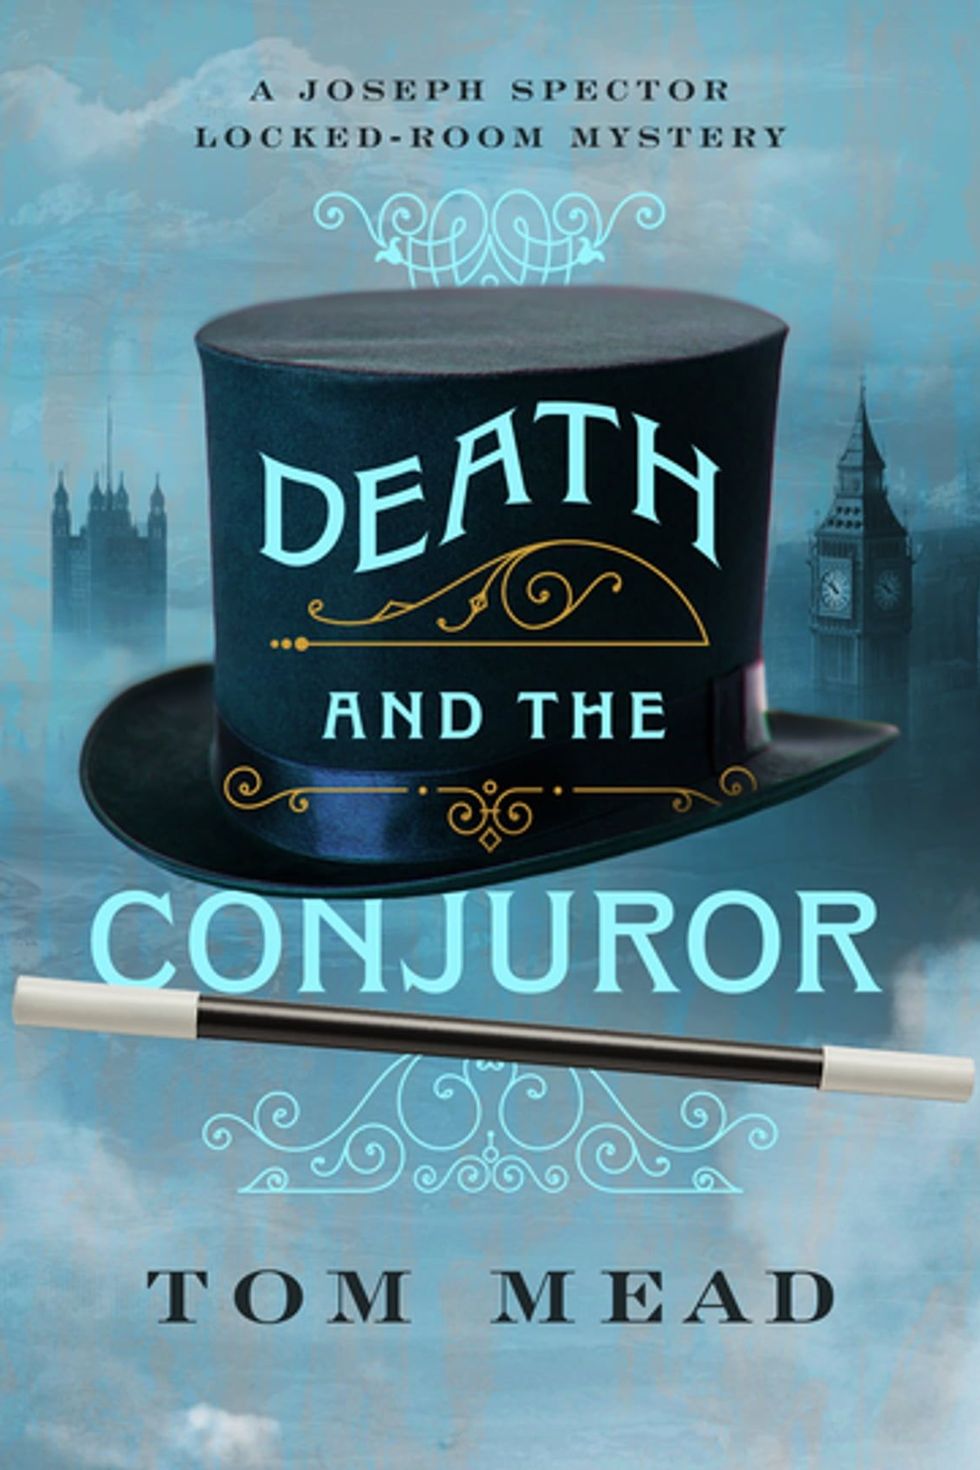 Death and the Conjuror: A Locked-Room Mystery